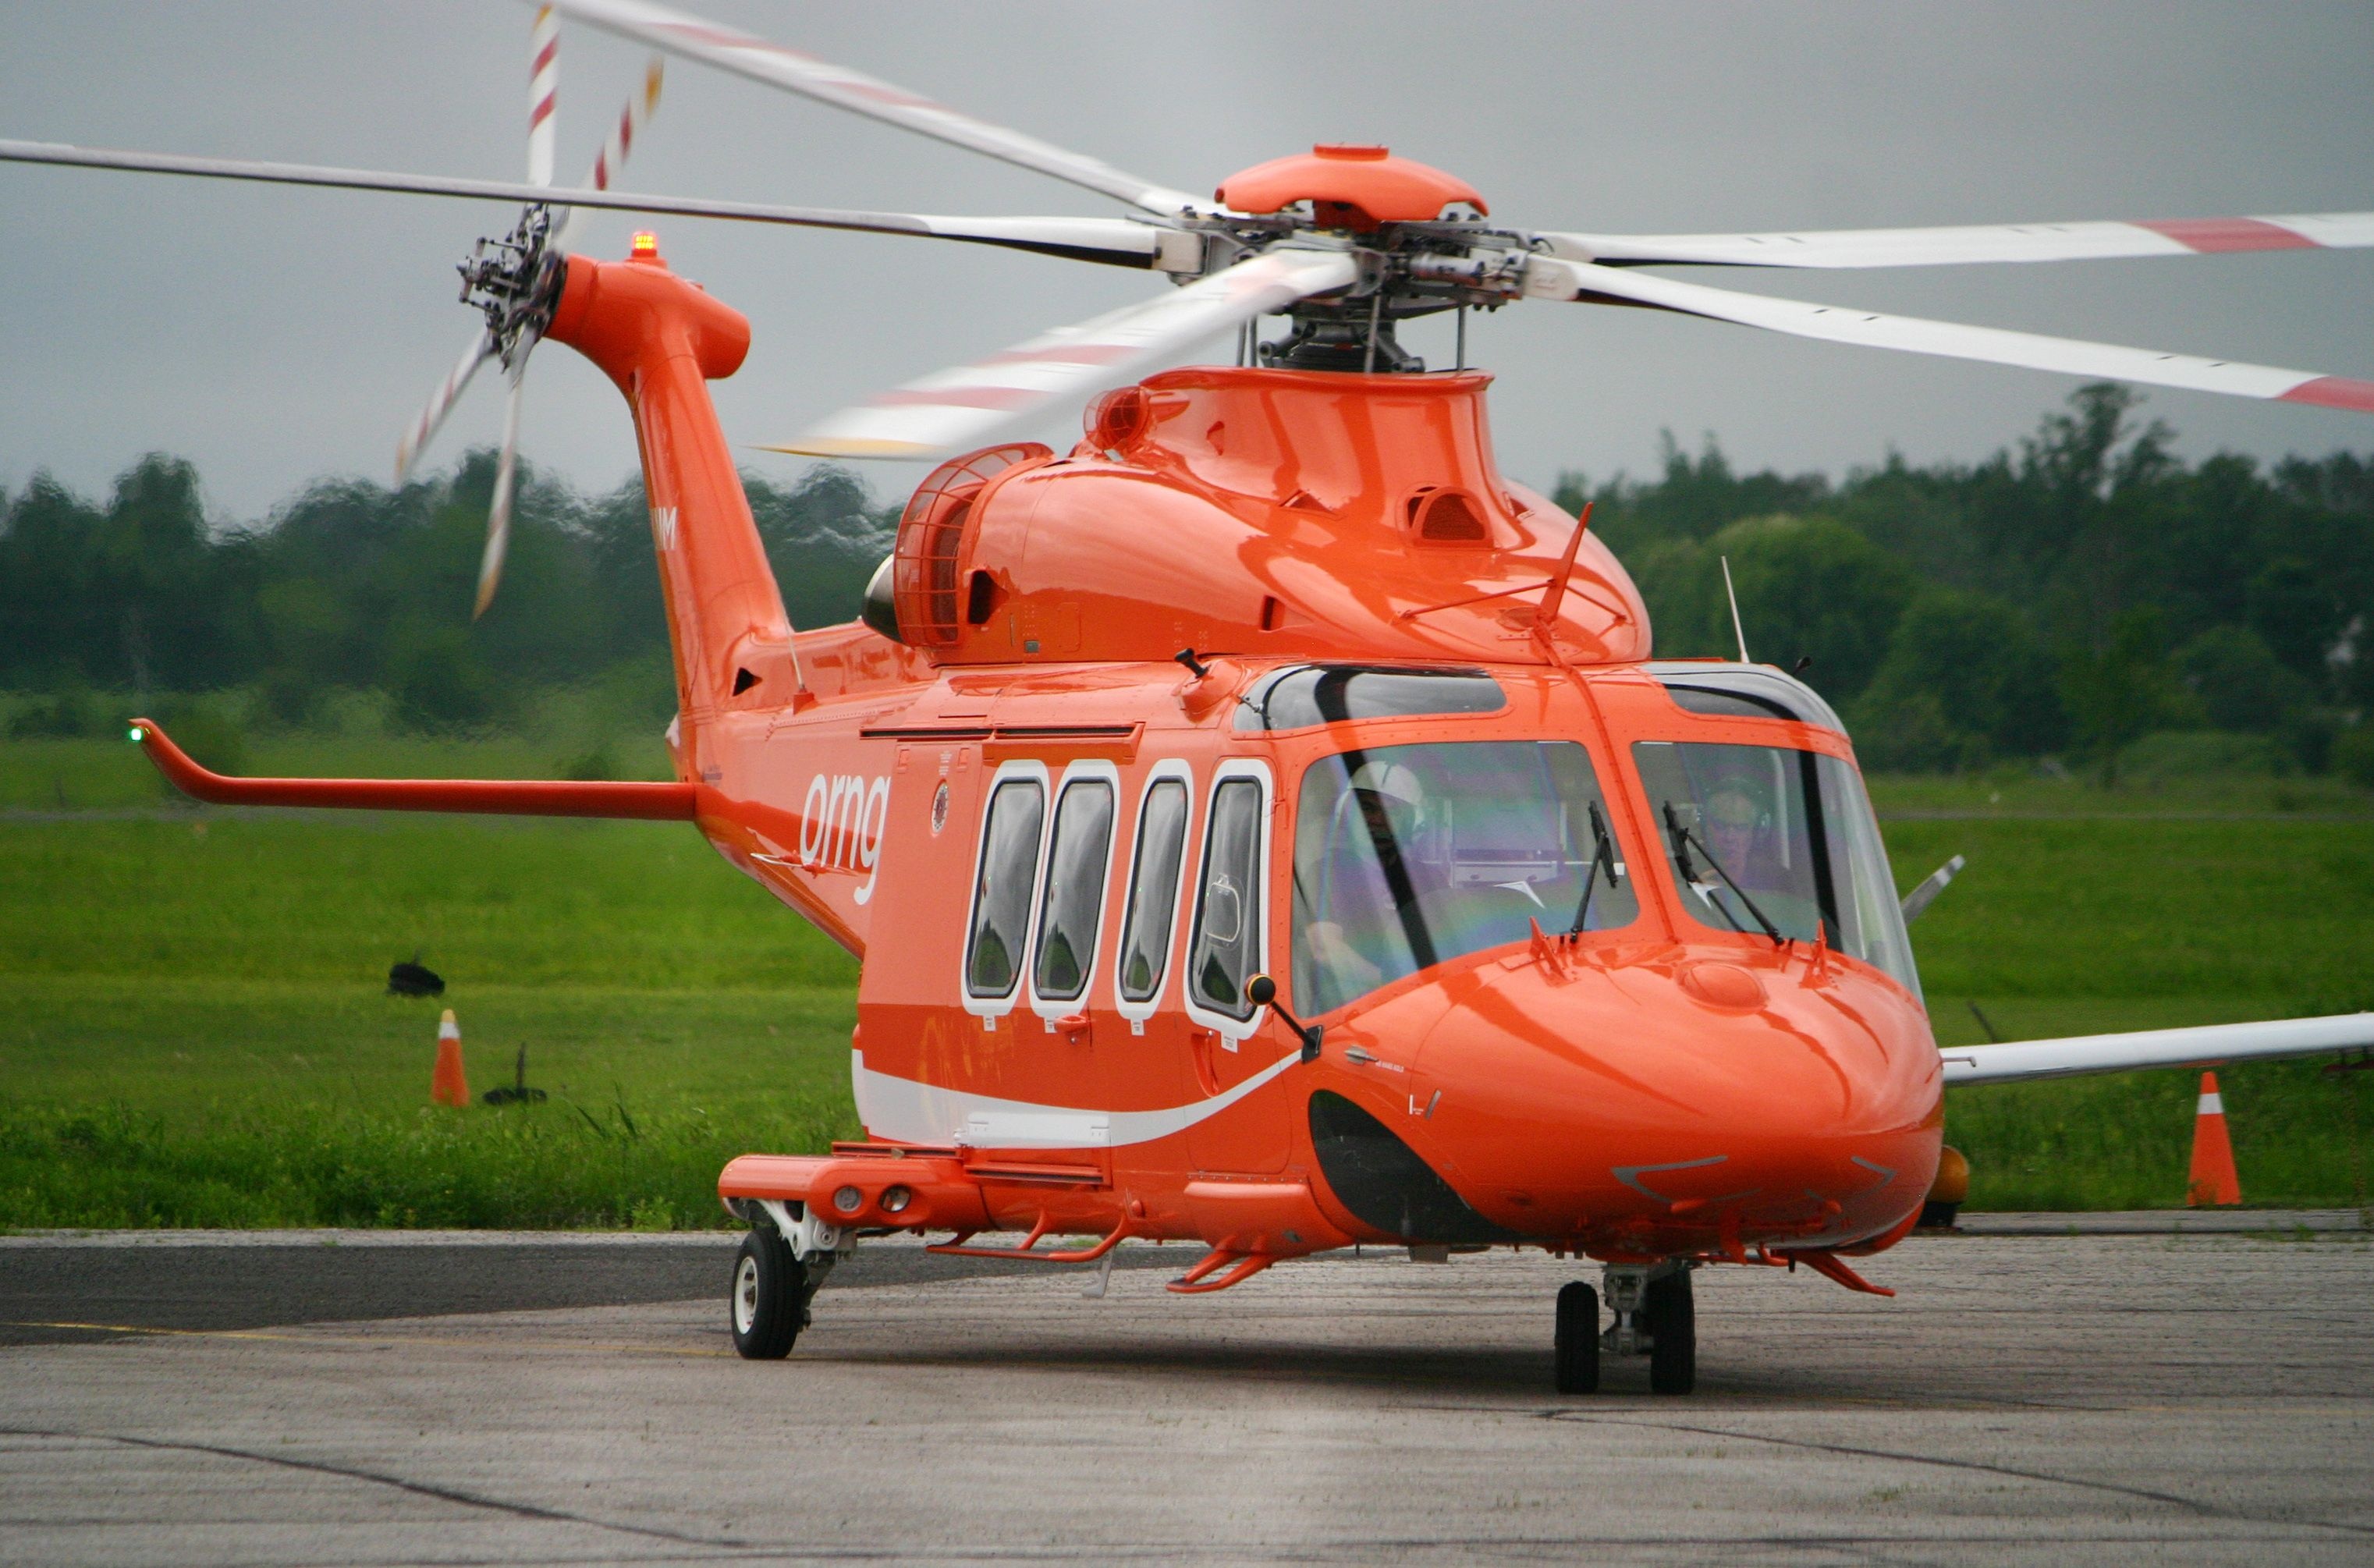 AW139 was originally designed and developed jointly by Agusta and Bell Helicopters and marketed as the Agusta-Bell | Helicopter, Bell helicopter, Augusta westland 3050x2010